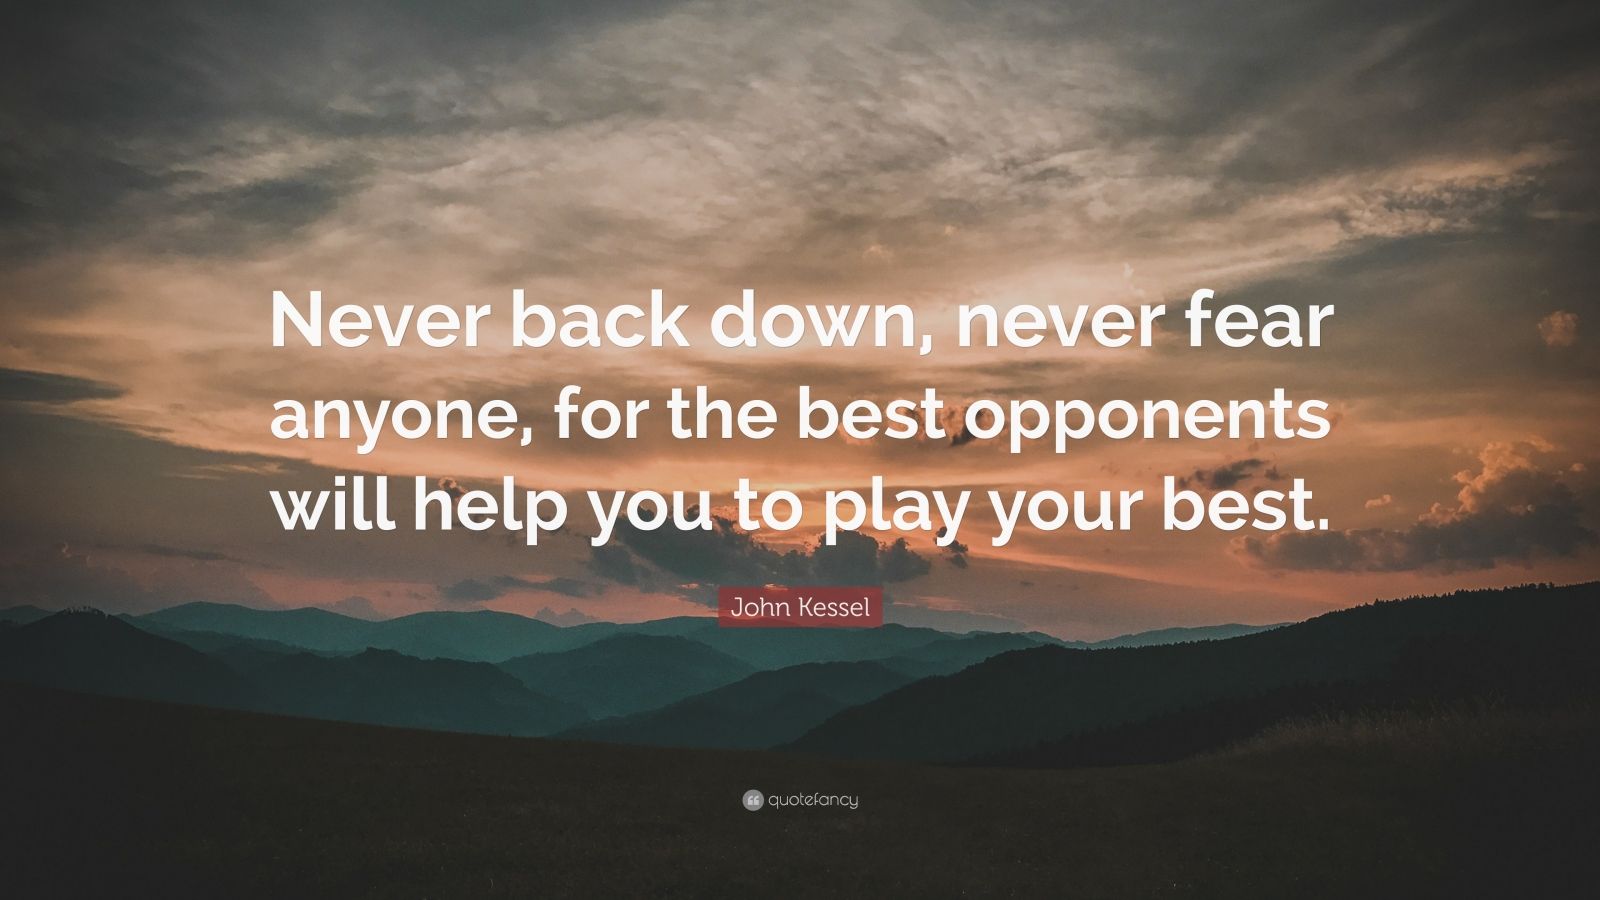 John Kessel Quote: “Never back down, never fear anyone, for the best